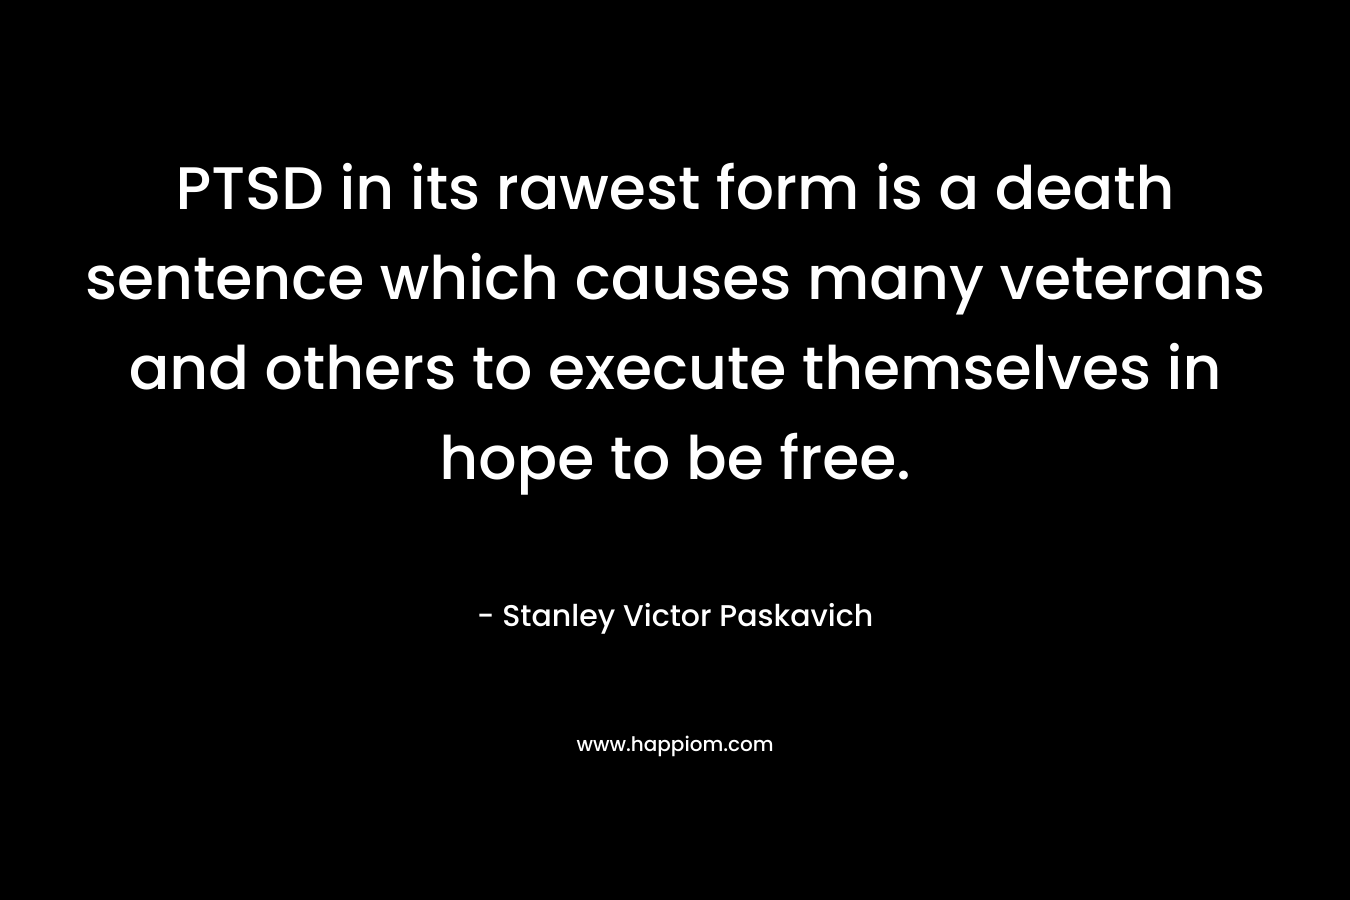 PTSD in its rawest form is a death sentence which causes many veterans and others to execute themselves in hope to be free.